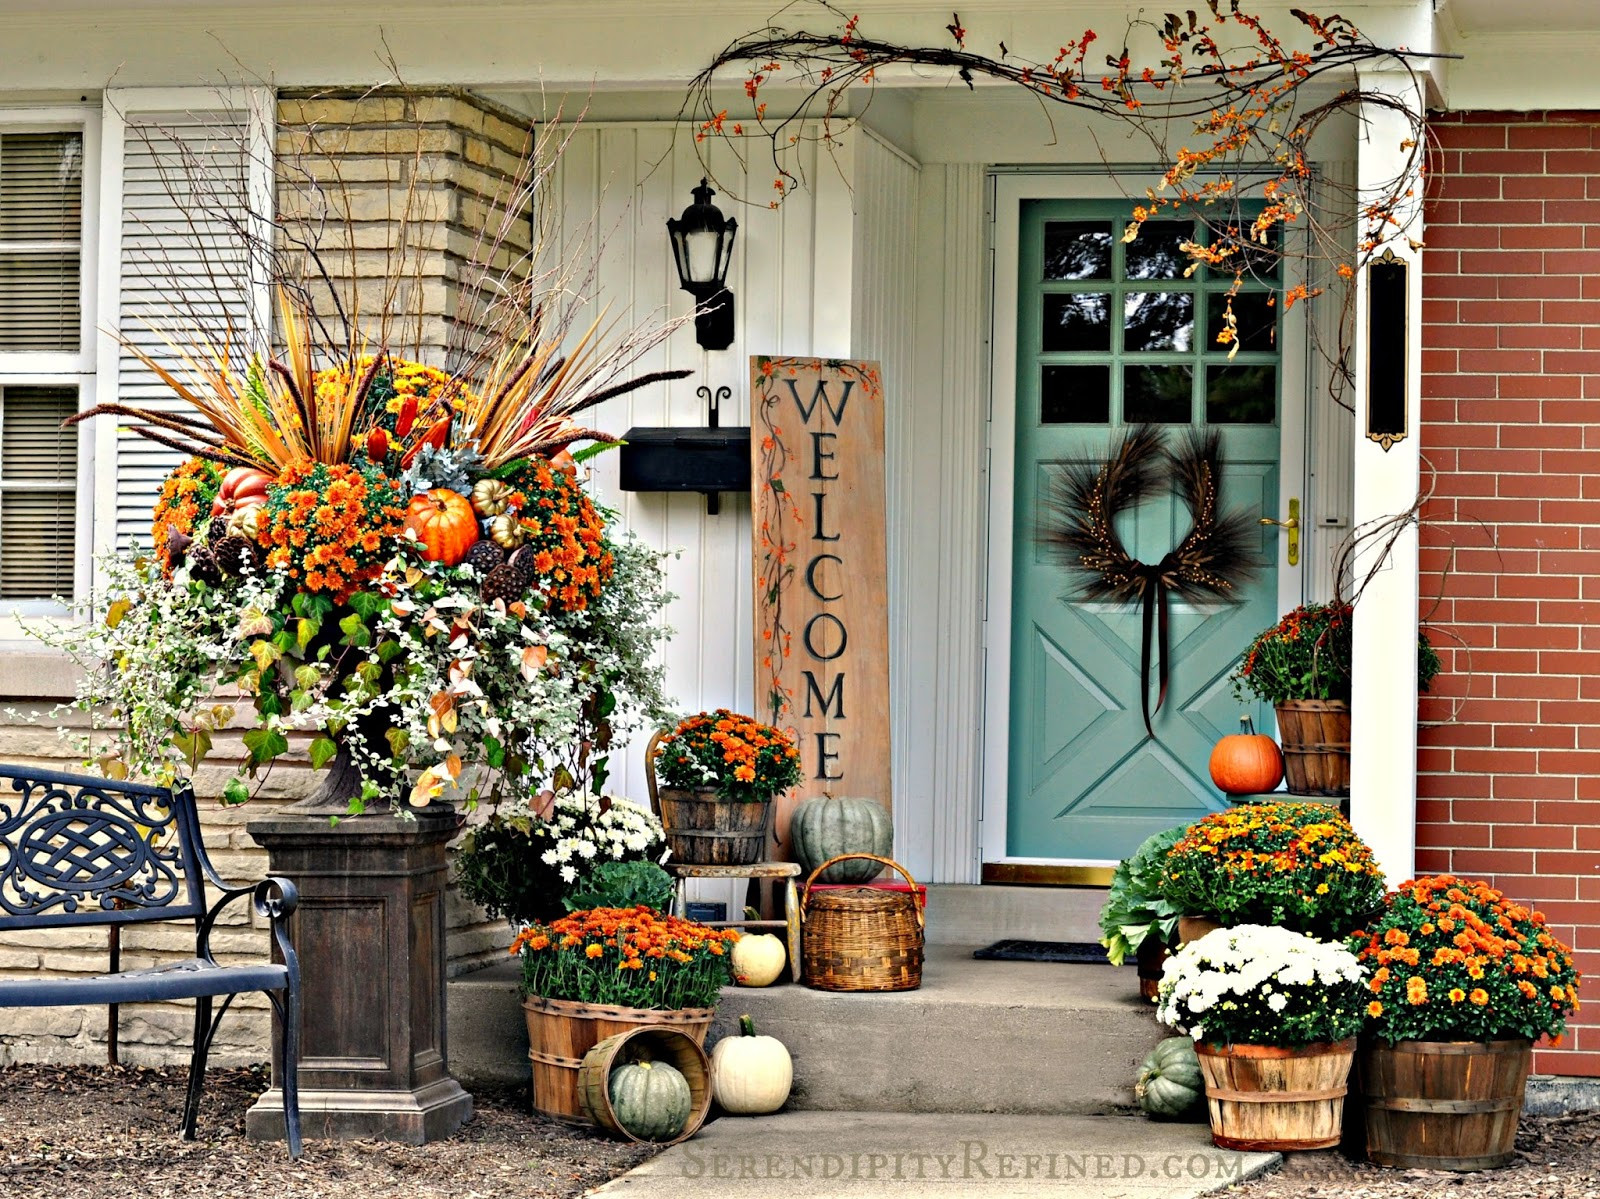 Fall Decorating Ideas For Outside
 Fabulous Outdoor Decorating Tips and Ideas for Fall ZING